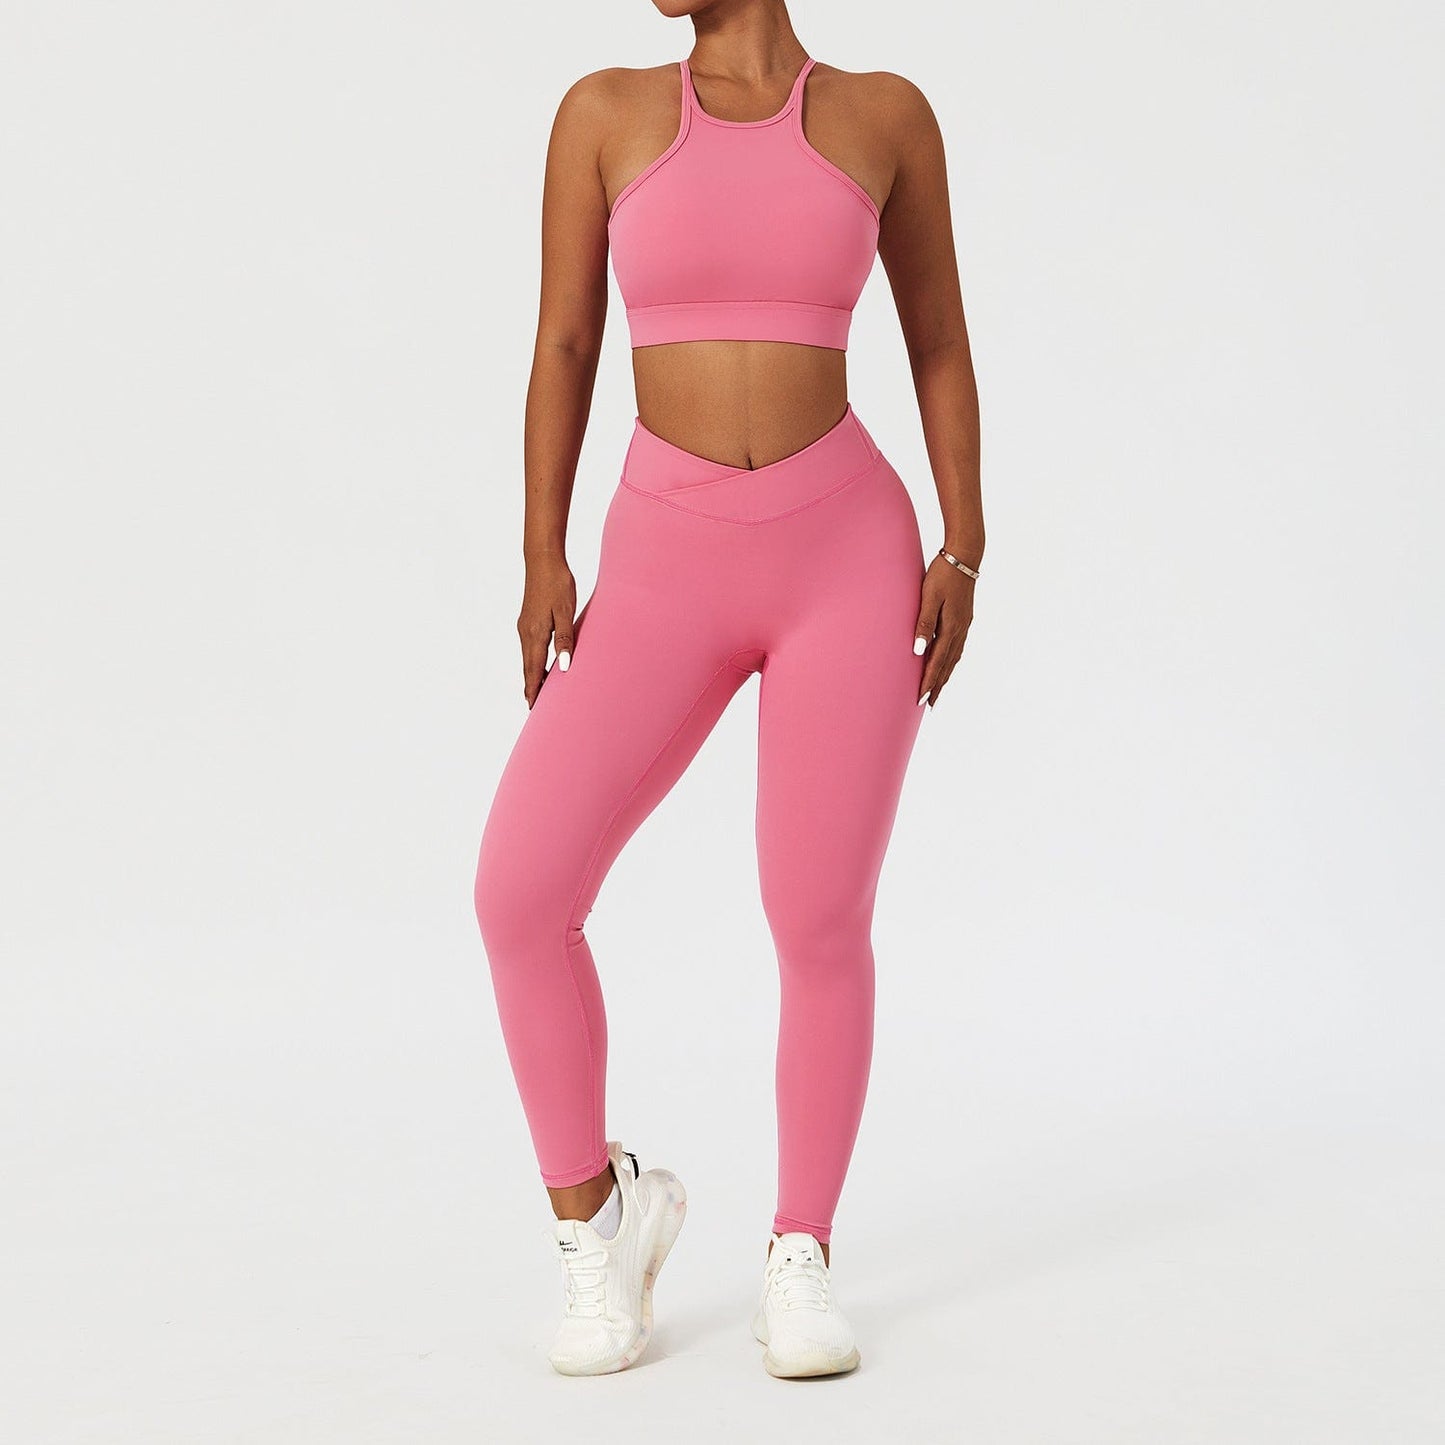 Women 2 Piece Quick Dry Jogging Training Wear Breathable Gym Fitness Sets Alpha C Apparel L / Pink style 3